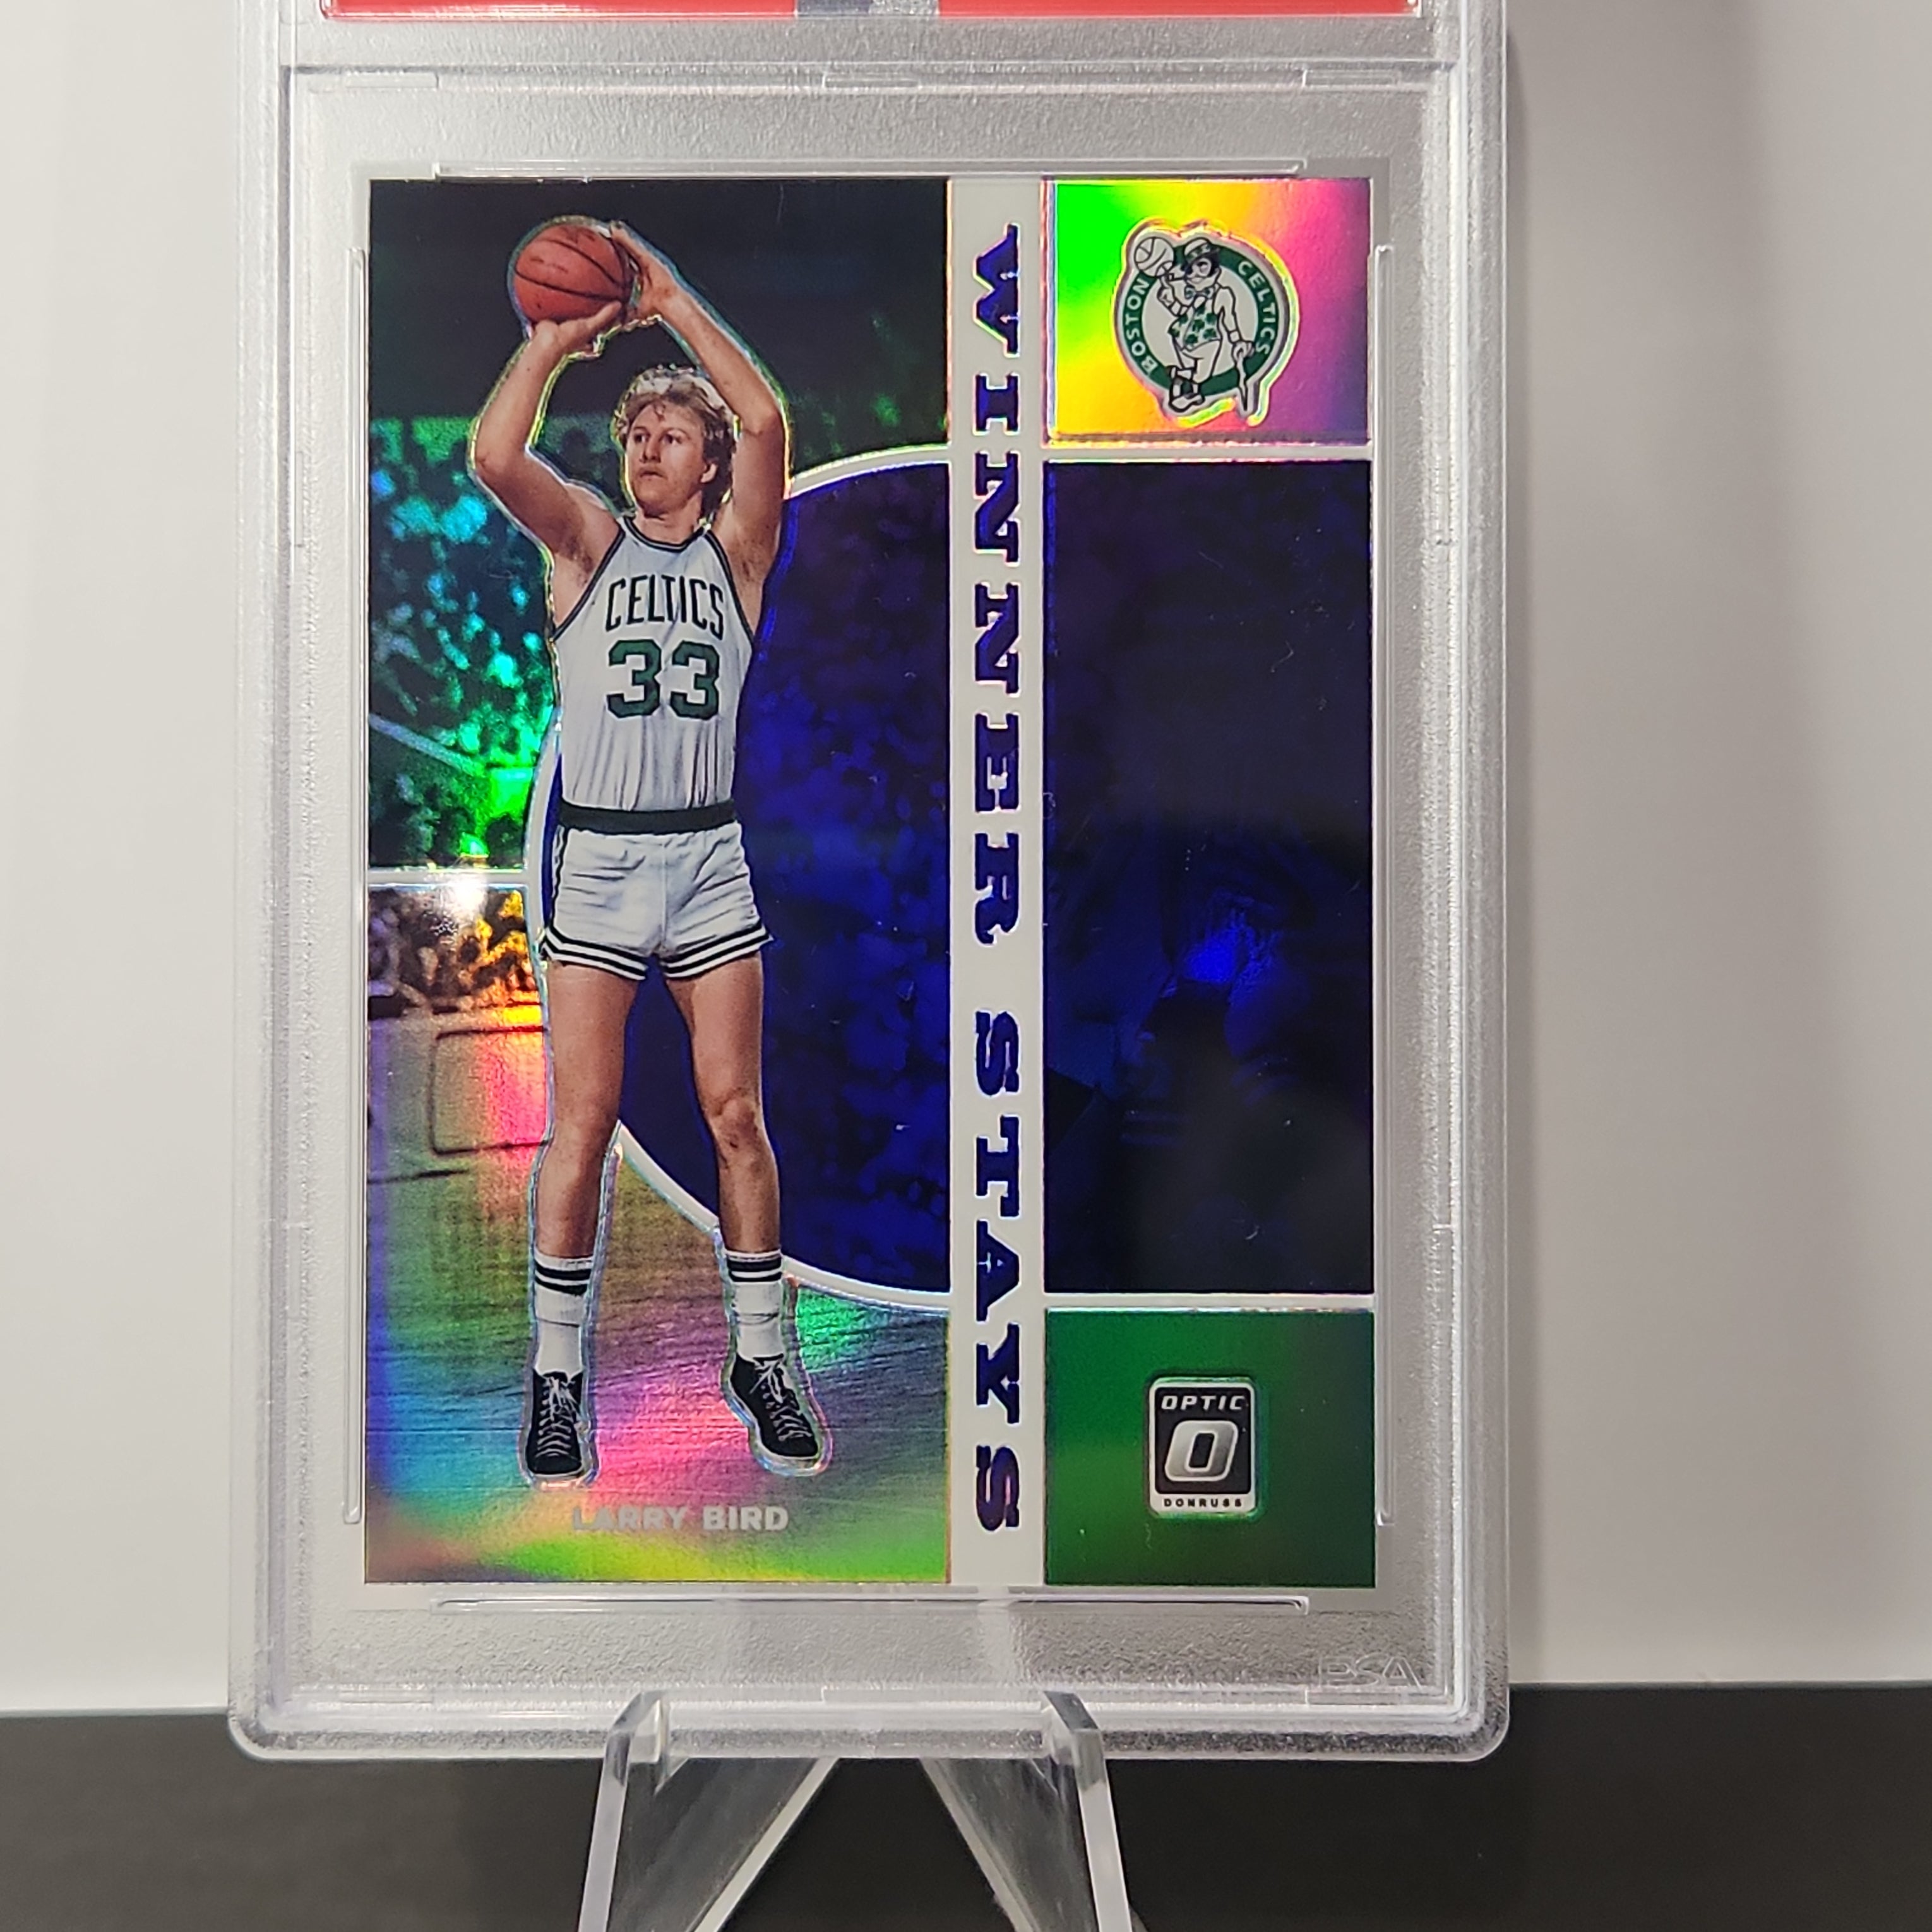 Larry Bird 2019/20 Optic Winner Stays Purple **PSA GEM MINT 10** - Premium  from 1of1 Collectables - Just $175! Shop now at 1of1 Collectables